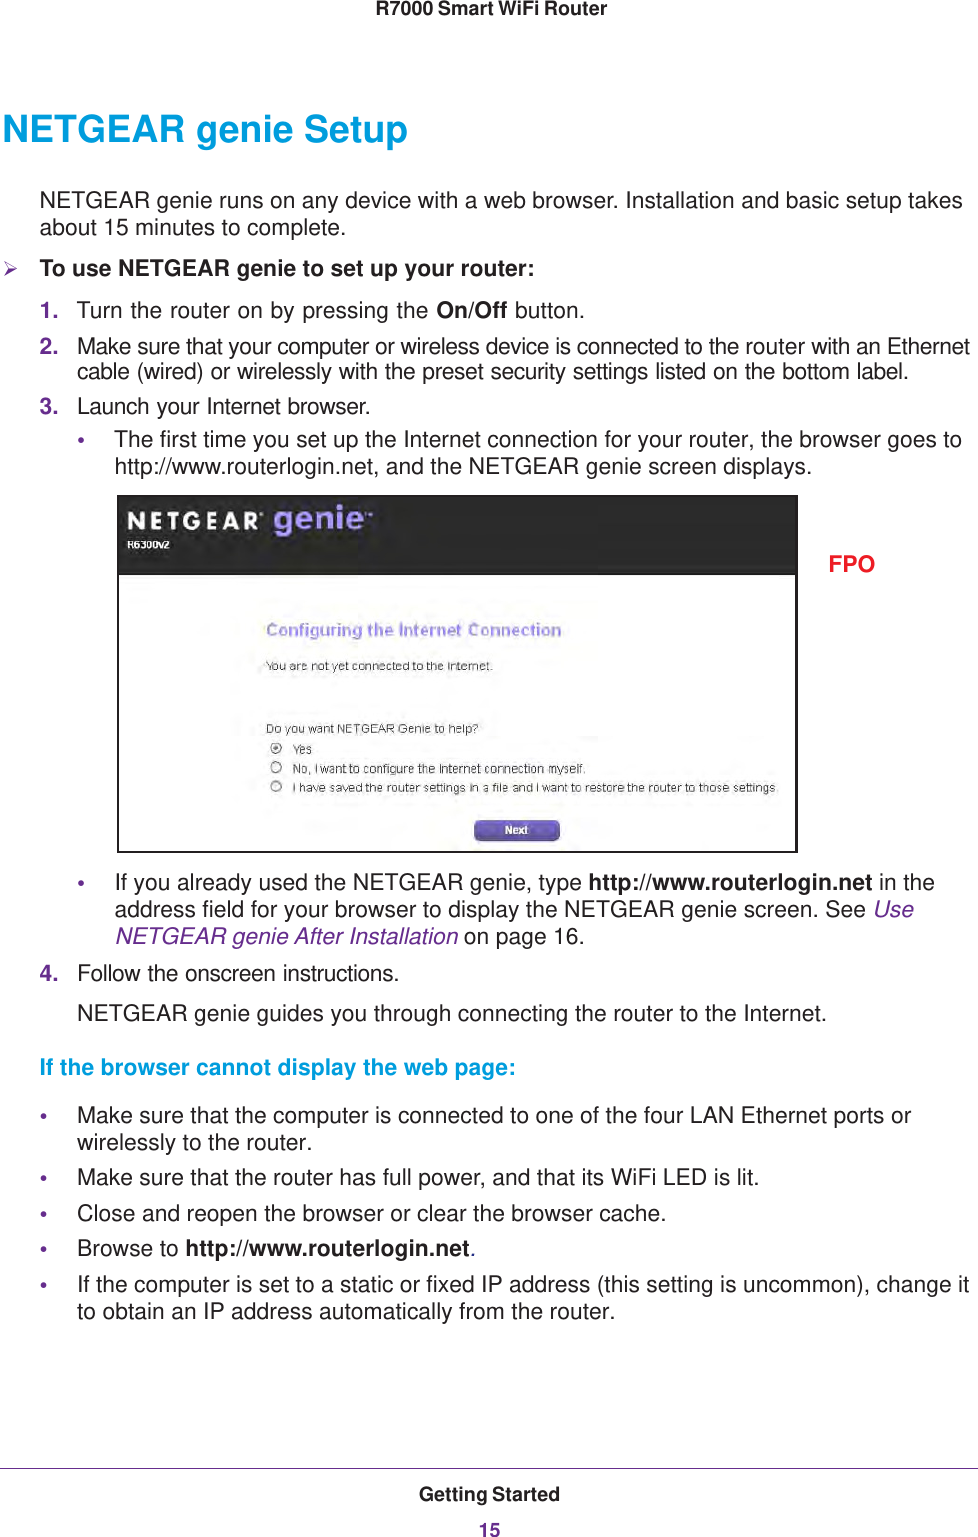 Getting Started15 R7000 Smart WiFi RouterNETGEAR genie SetupNETGEAR genie runs on any device with a web browser. Installation and basic setup takes about 15  minutes to complete. To use NETGEAR genie to set up your router:1. Turn the router on by pressing the On/Off button. 2. Make sure that your computer or wireless device is connected to the router with an Ethernet cable (wired) or wirelessly with the preset security settings listed on the bottom label.3. Launch your Internet browser.•The first time you set up the Internet connection for your router, the browser goes to http://www.routerlogin.net, and the NETGEAR genie screen displays.FPO•If you already used the NETGEAR genie, type http://www.routerlogin.net in the address field for your browser to display the NETGEAR genie screen. See Use NETGEAR genie After Installation on page  16.4. Follow the onscreen instructions.NETGEAR genie guides you through connecting the router to the Internet. If the browser cannot display the web page: •Make sure that the computer is connected to one of the four LAN Ethernet ports or wirelessly to the router.•Make sure that the router has full power, and that its WiFi LED is lit.•Close and reopen the browser or clear the browser cache.•Browse to http://www.routerlogin.net.•If the computer is set to a static or fixed IP address (this setting is uncommon), change it to obtain an IP address automatically from the router.